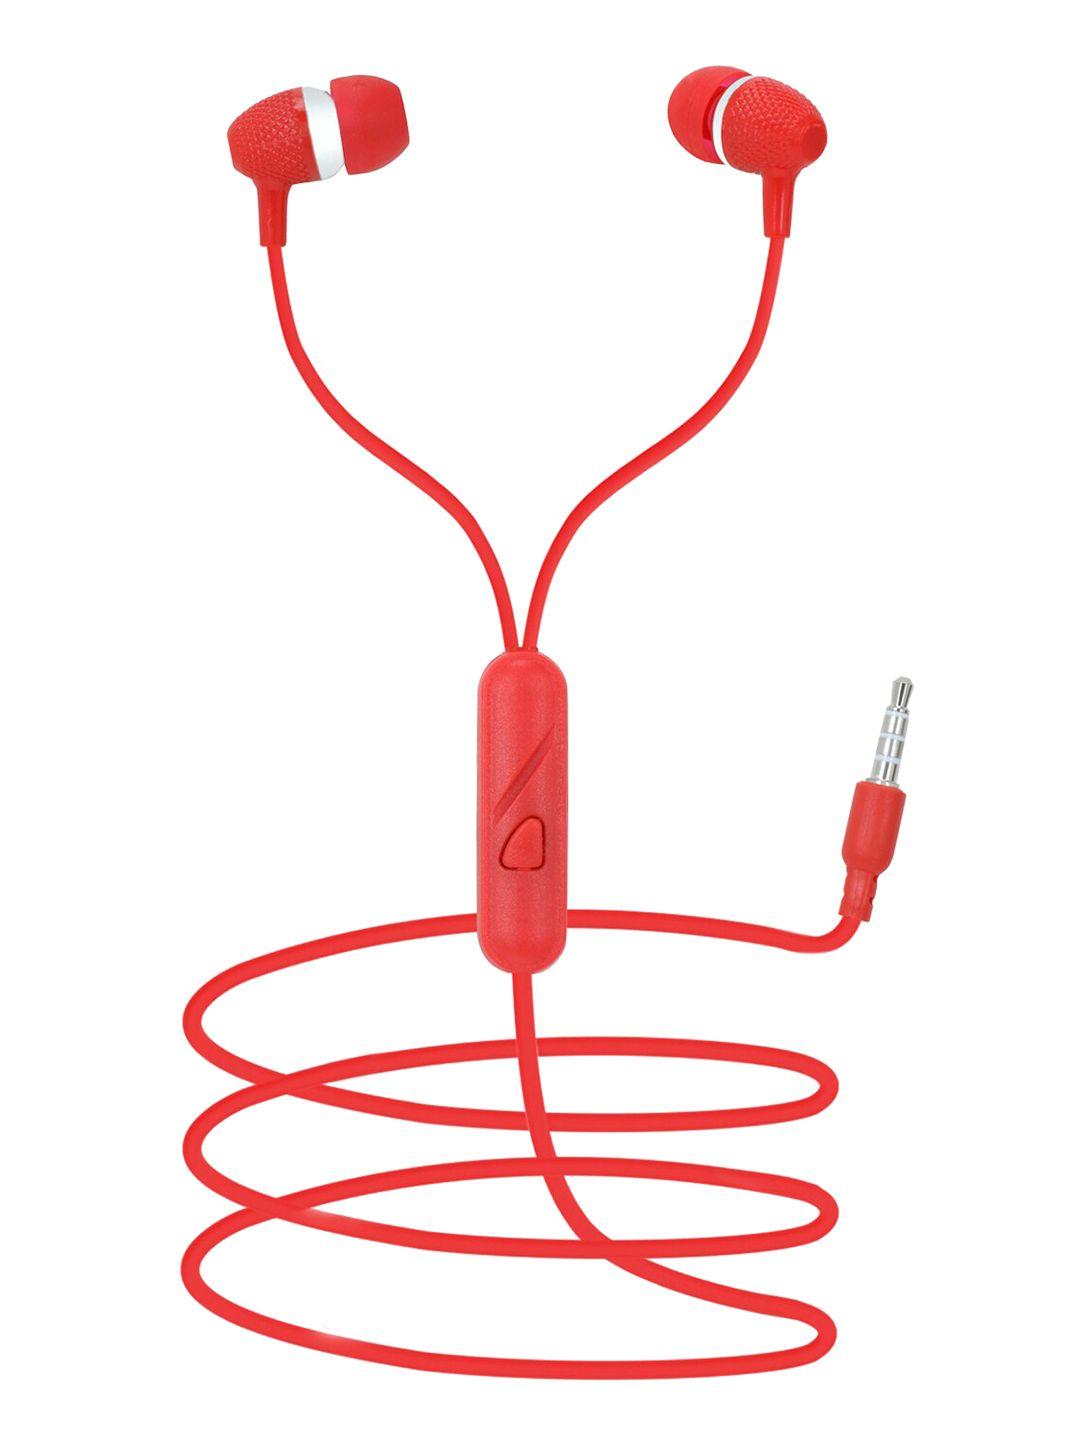 swagme red solid  boomdhoom ie009 in-ear wired earphones with mic